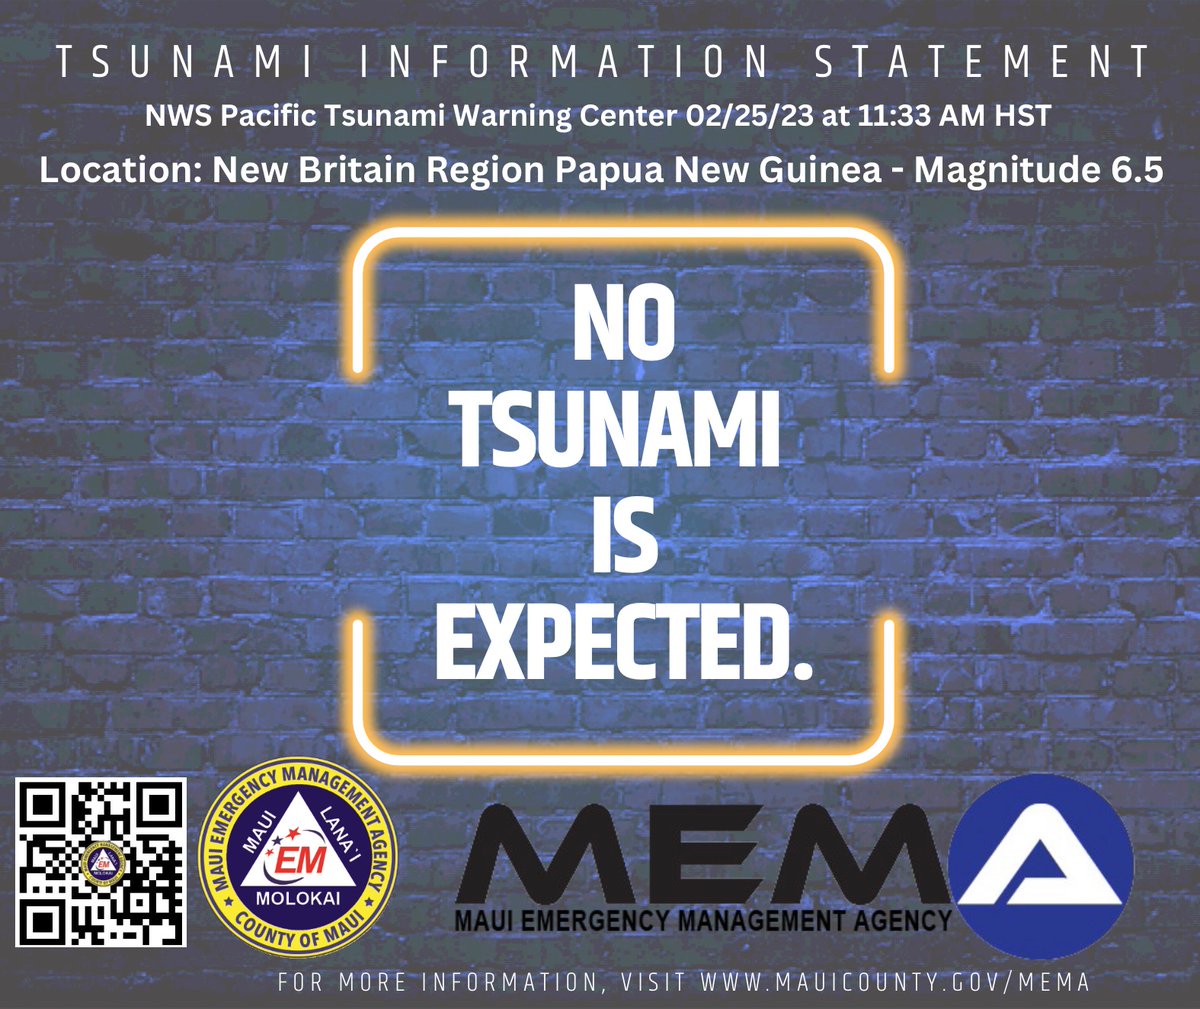 RT @Maui_EMA: NO TSUNAMI IS EXPECTED.

NWS Pacific Tsunami Warning Center 02/25/23 at 11:33 AM HST https://t.co/4SqDXhJ3Sv